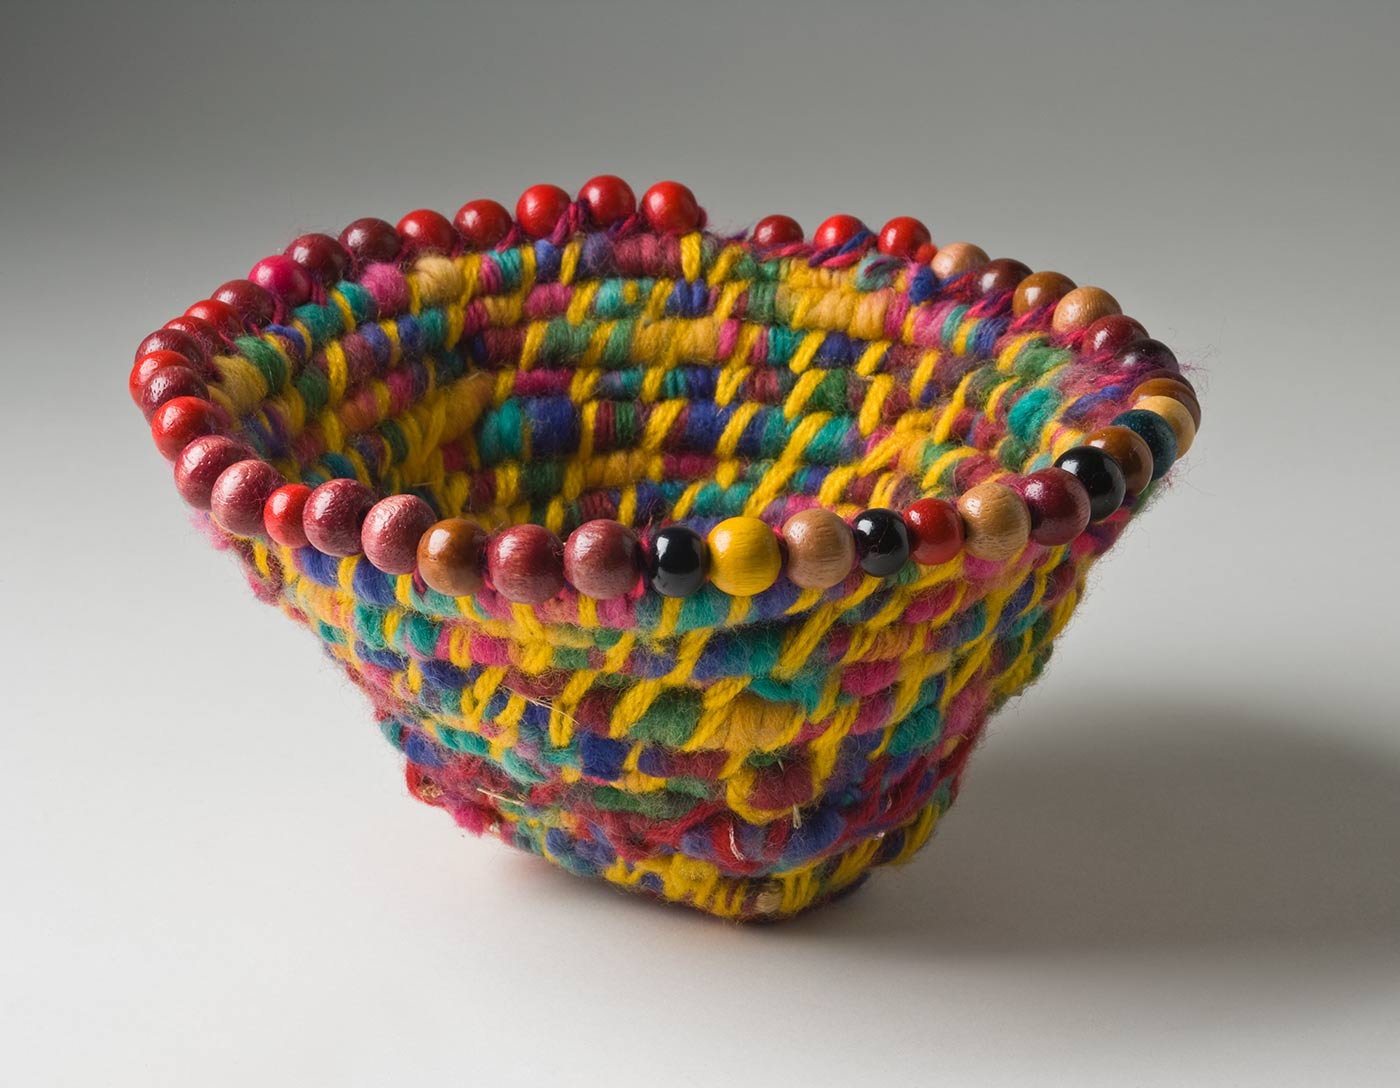 A funnel shaped basket of multicoloured coiled yarn over plant fibre with a beaded edge. The yarn is rainbow coloured with a dominant yellow tone. The maroon yarn used at the base has small silver sequins in it. The round wood beads attached at the top edge of the basket are mostly red and brown with a few green, yellow, black and natural coloured ones. - click to view larger image